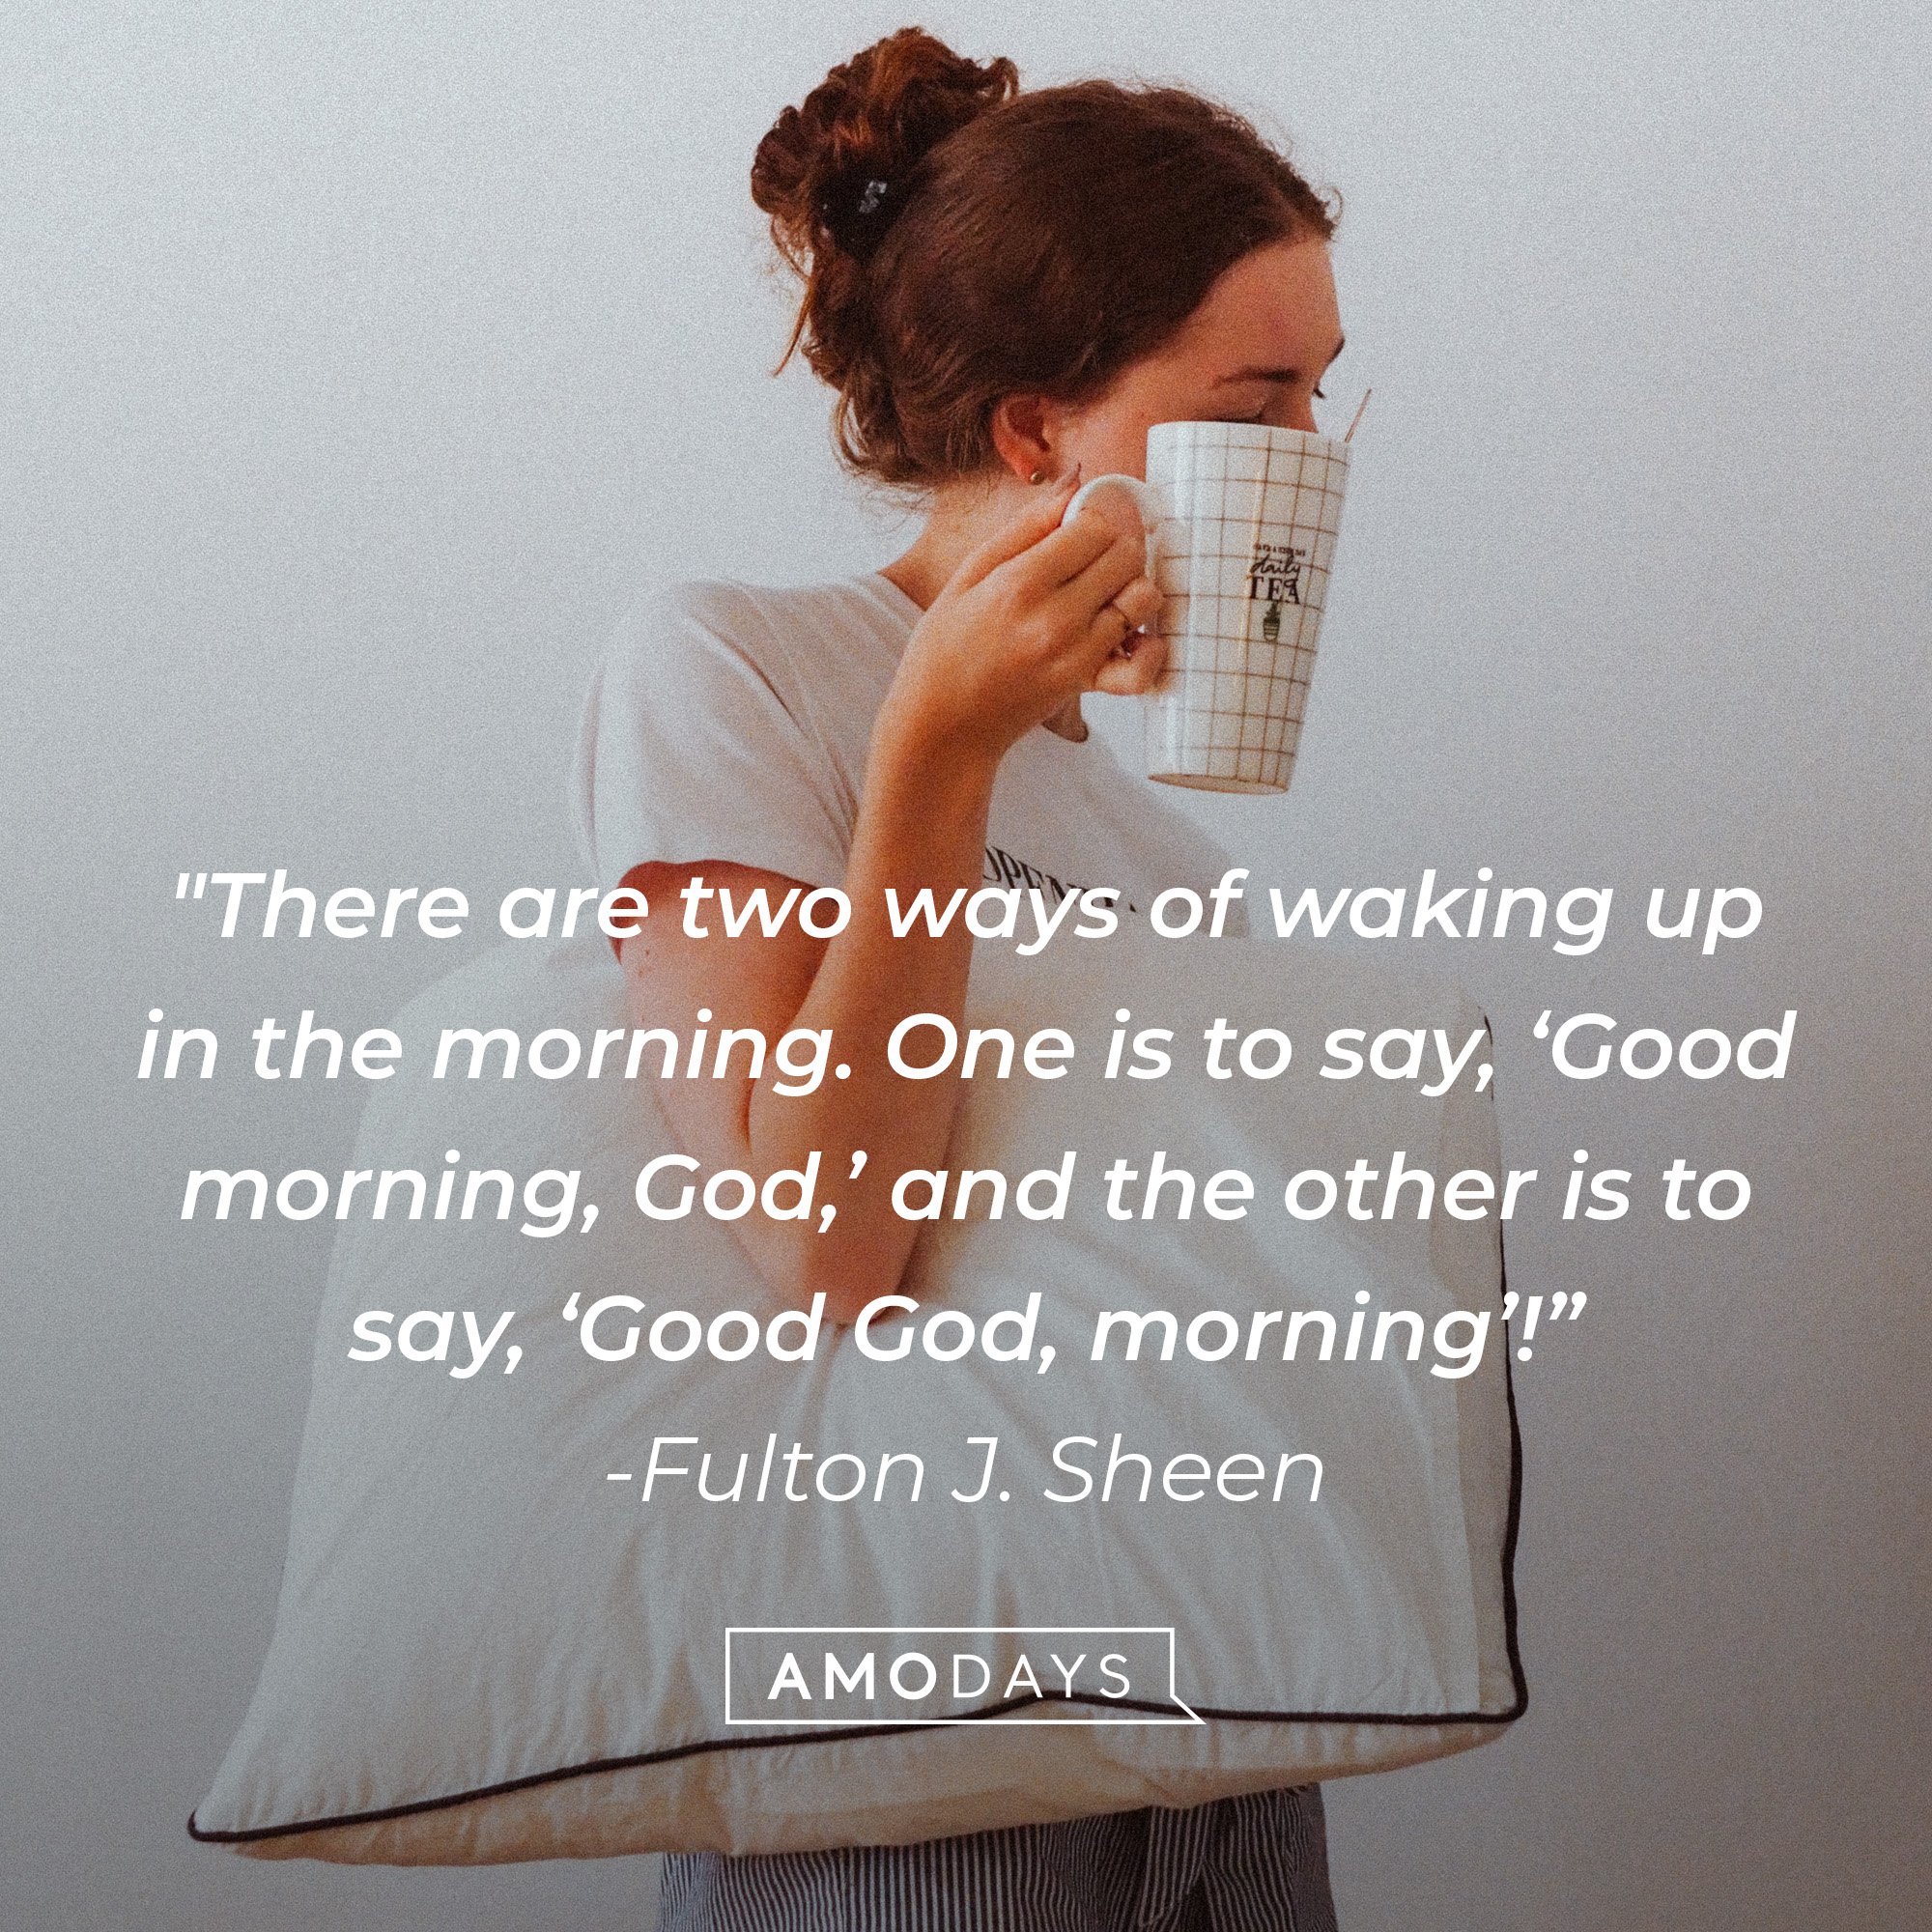  Fulton J. Sheen's quote: "There are two ways of waking up in the morning. One is to say, ‘Good morning, God,’ and the other is to say, ‘Good God, morning’!” | Image: AmoDays